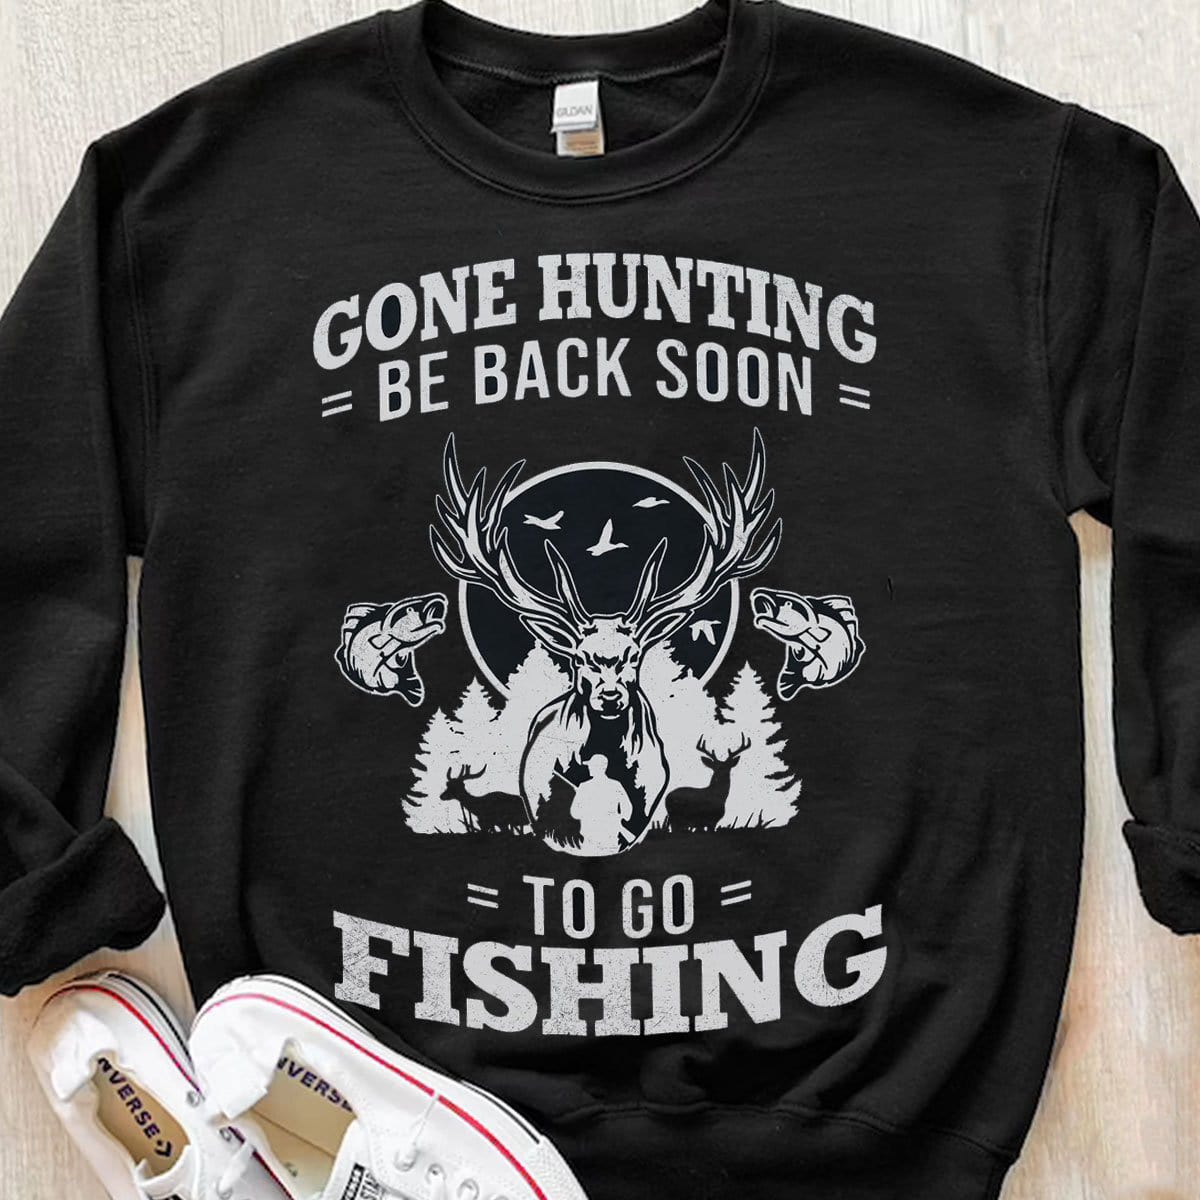 Hunting And Fishing Shirts, Deer Hunting Hoodies, Gone Hunting Be Back Soon  To Go Fishing Shirts For Men, - Hope Fight